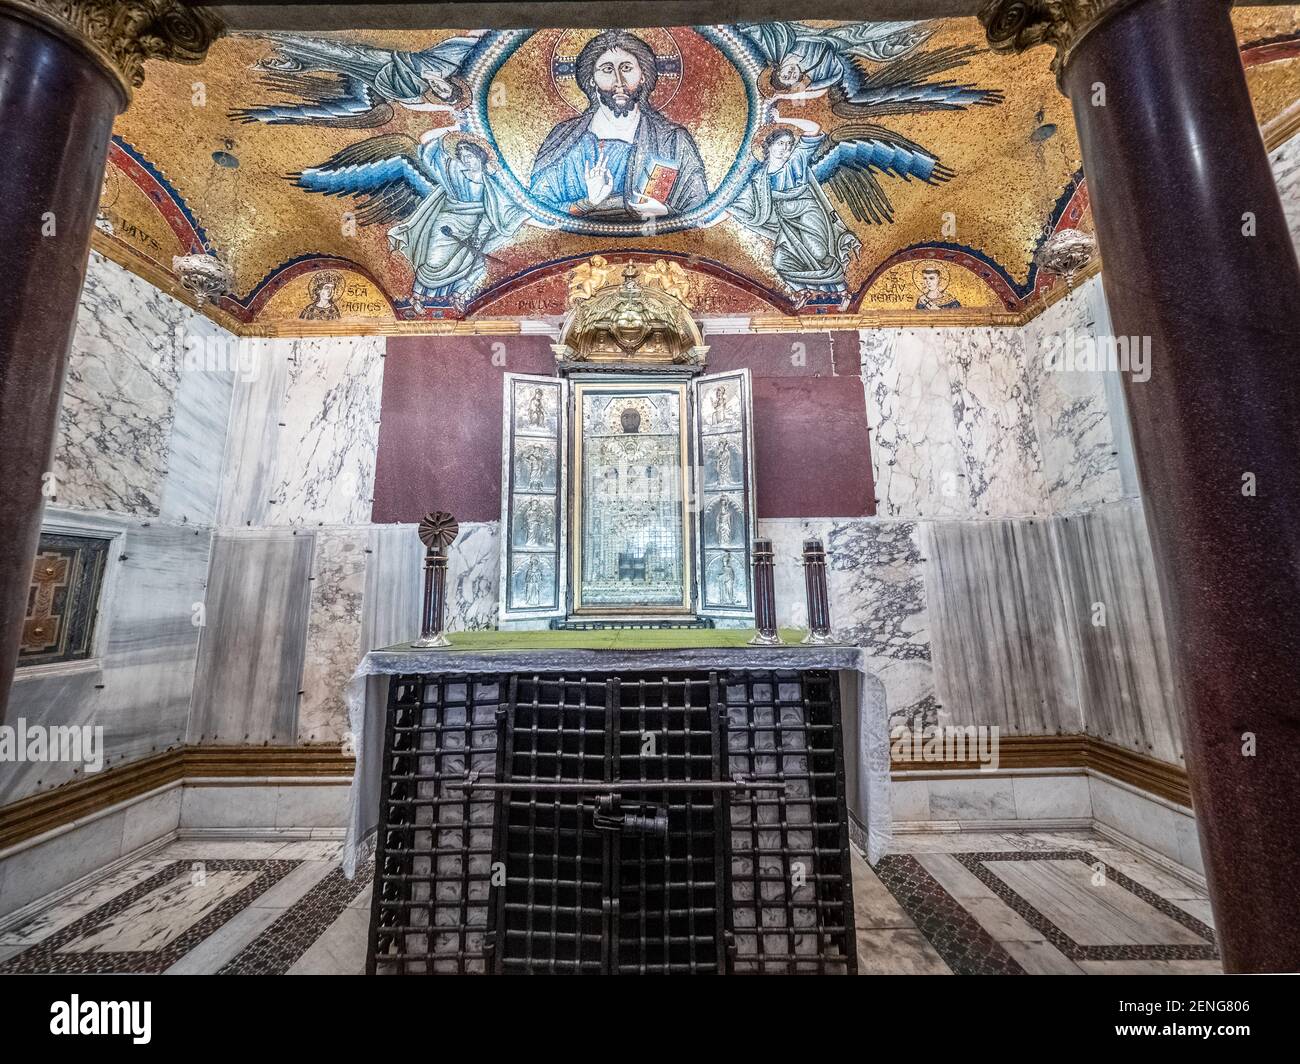 Main altar of the Sancta Sanctorum with the icon of Christ Pantocrator and above the mosaic of the 13th Century - Rome, Italy Stock Photo